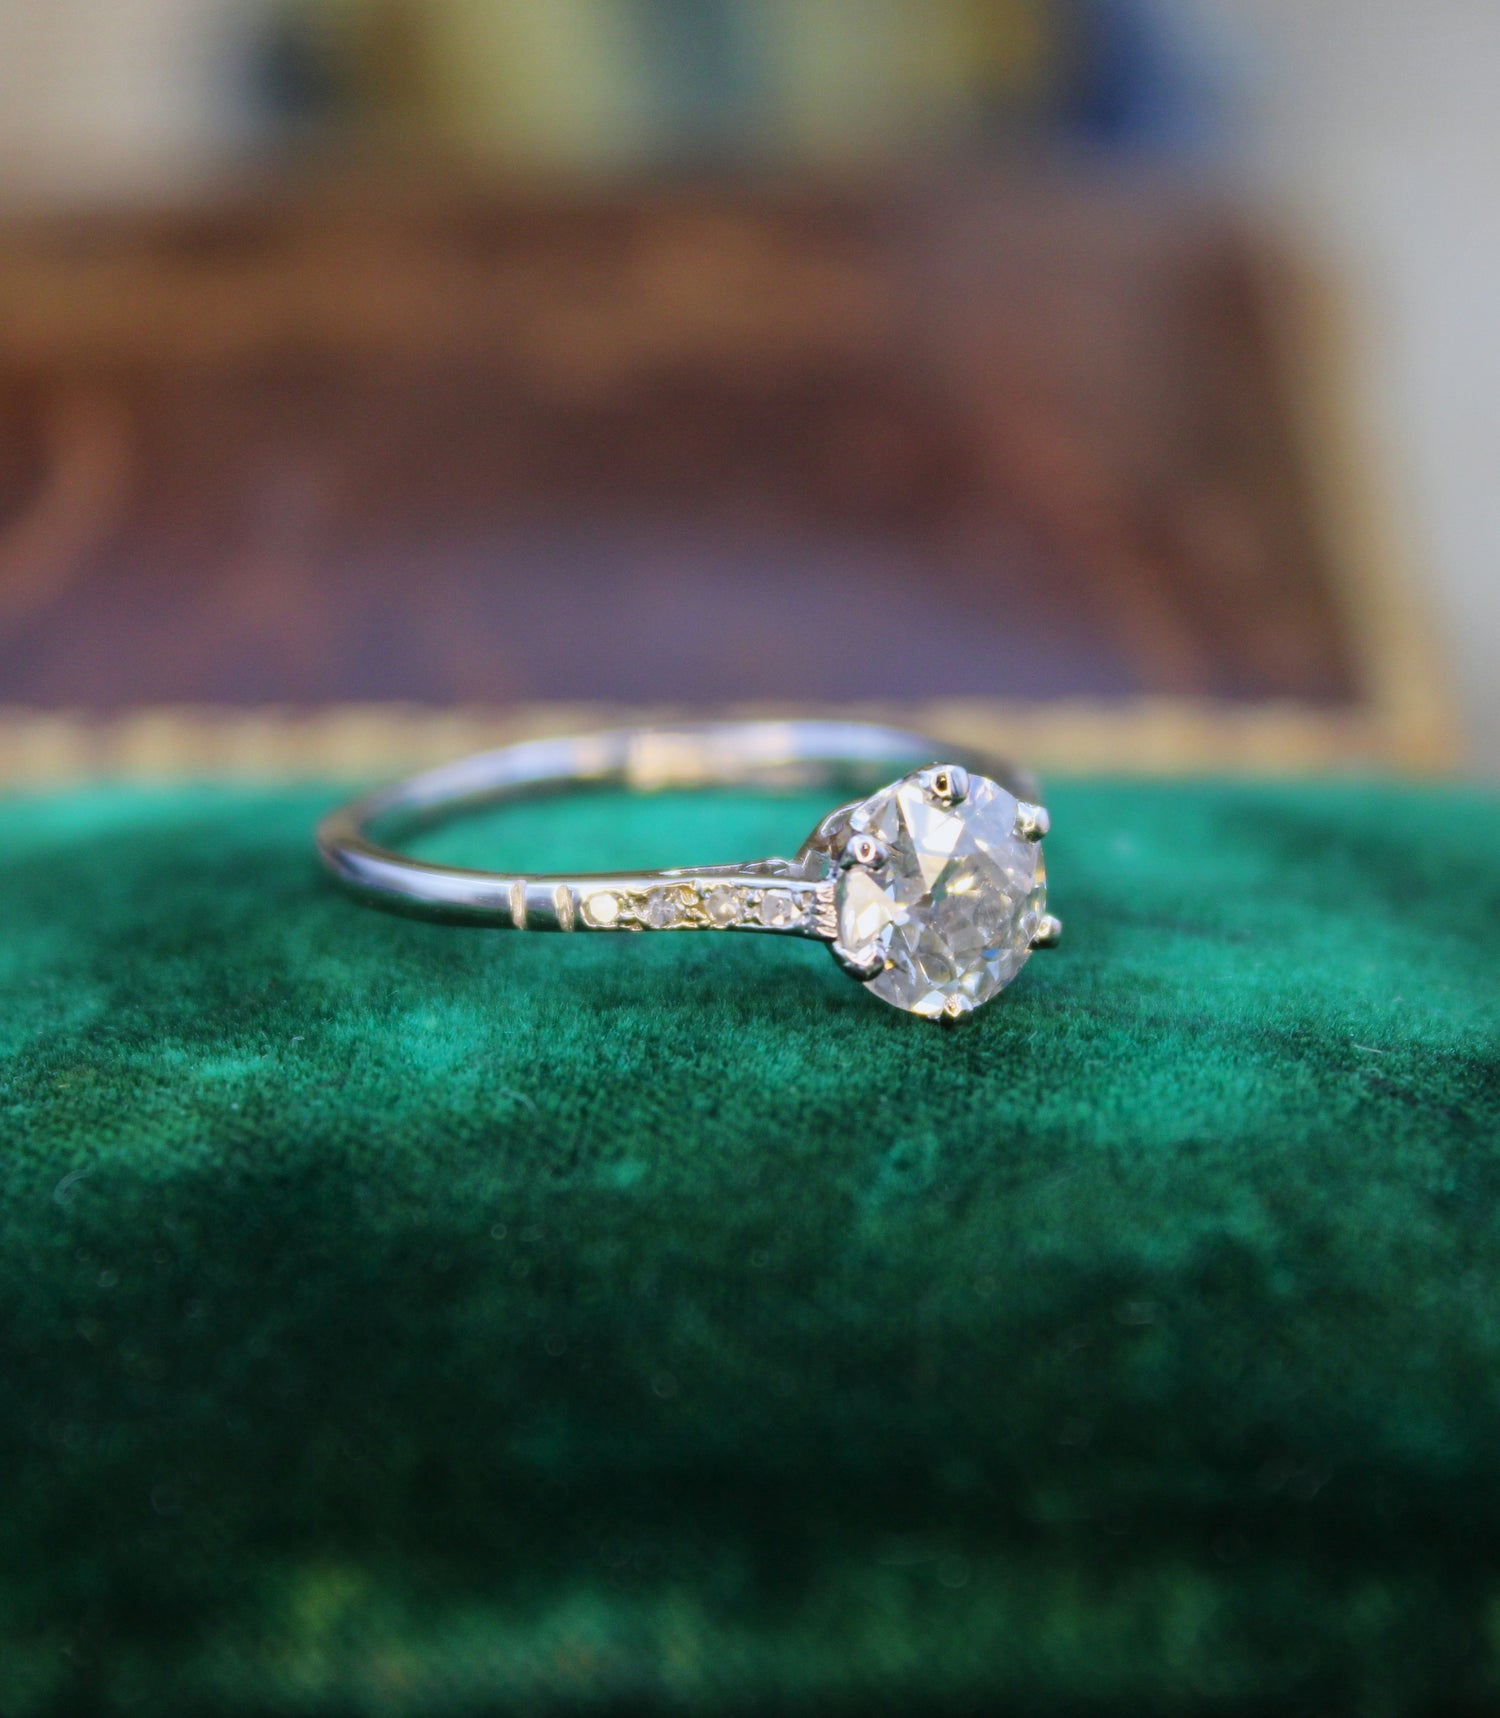 A very fine 0.92 Carat Diamond Solitaire Engagement Ring, mounted in Platinum, English. Circa 1930 - Robin Haydock Antiques